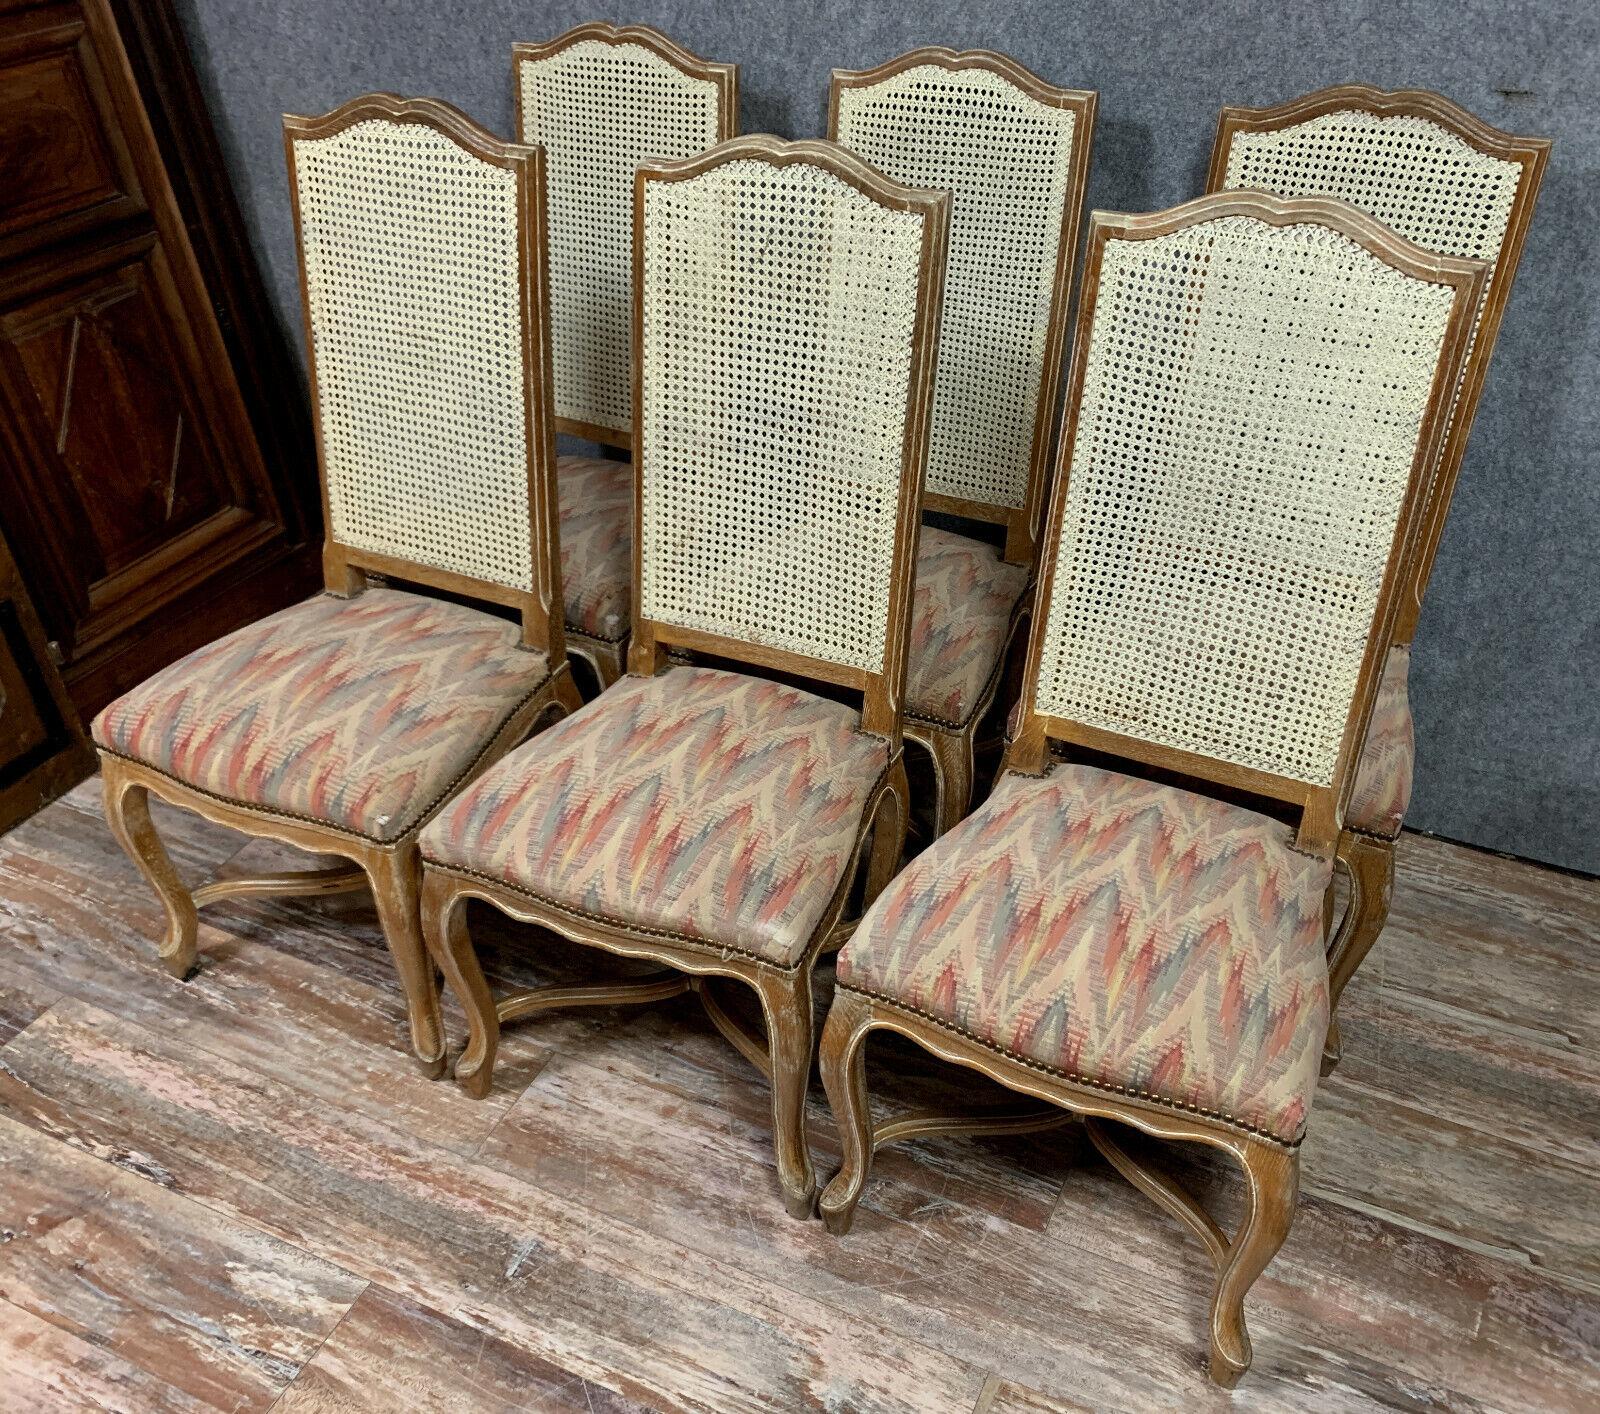 Stunning Set of 6 Louis XV High Back Cerused Wood Chairs circa 1900 -1X15 For Sale 2